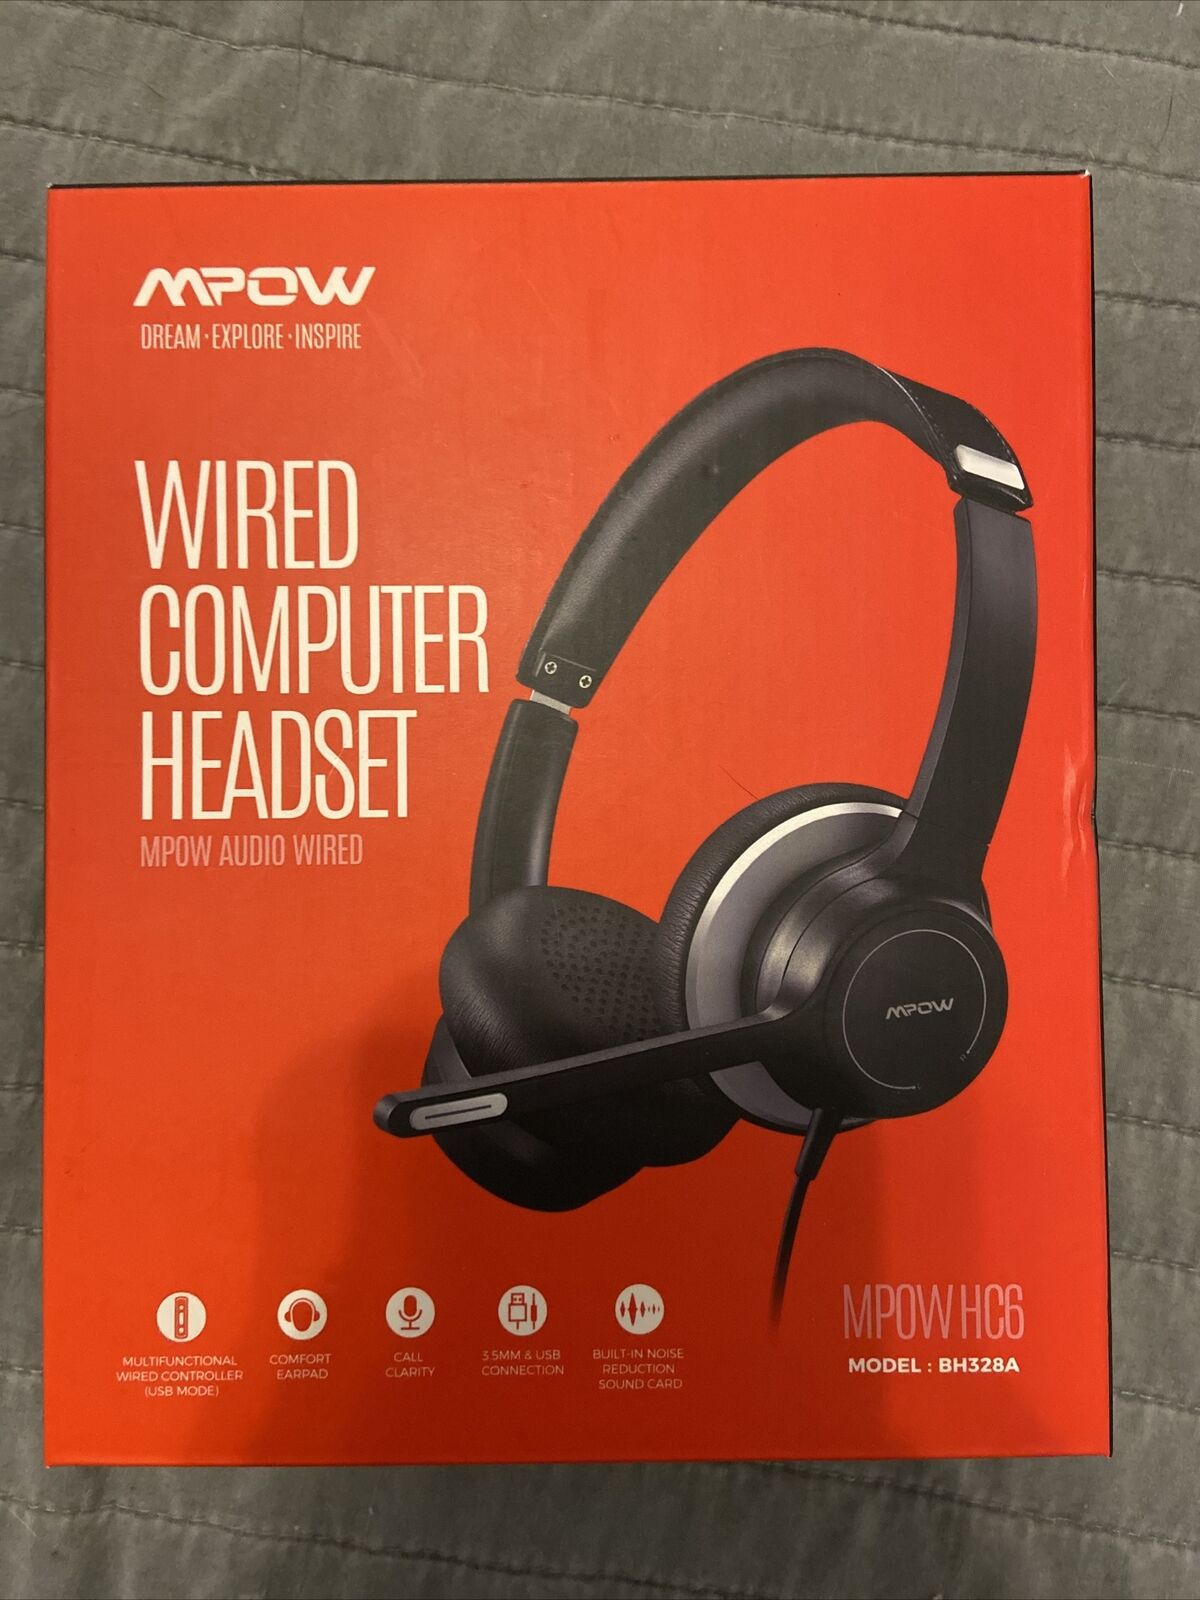 mpow wired computer headset - New In Box